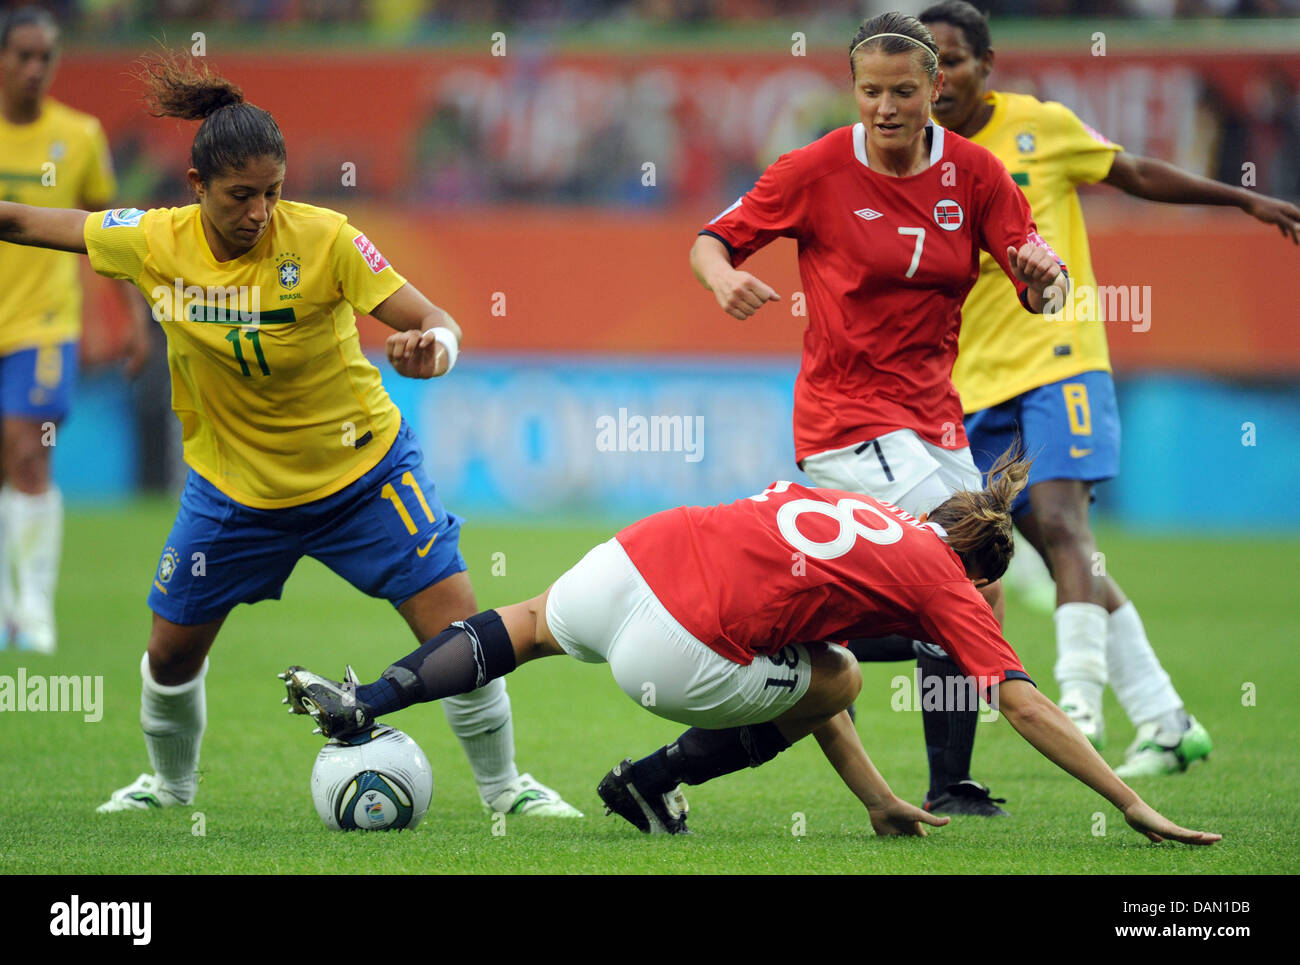 Cristiane of Brazil (L-R) and Guro Knutsen Mienna and Trine Roenning of Norway fight for the ball during the Group D match Brazil against Norway of FIFA Women's World Cup soccer tournament at the Arena Im Allerpark, Wolfsburg, Germany, 03 July 2011. Foto: Peter Steffen dpa/lni  +++(c) dpa - Bildfunk+++ Stock Photo